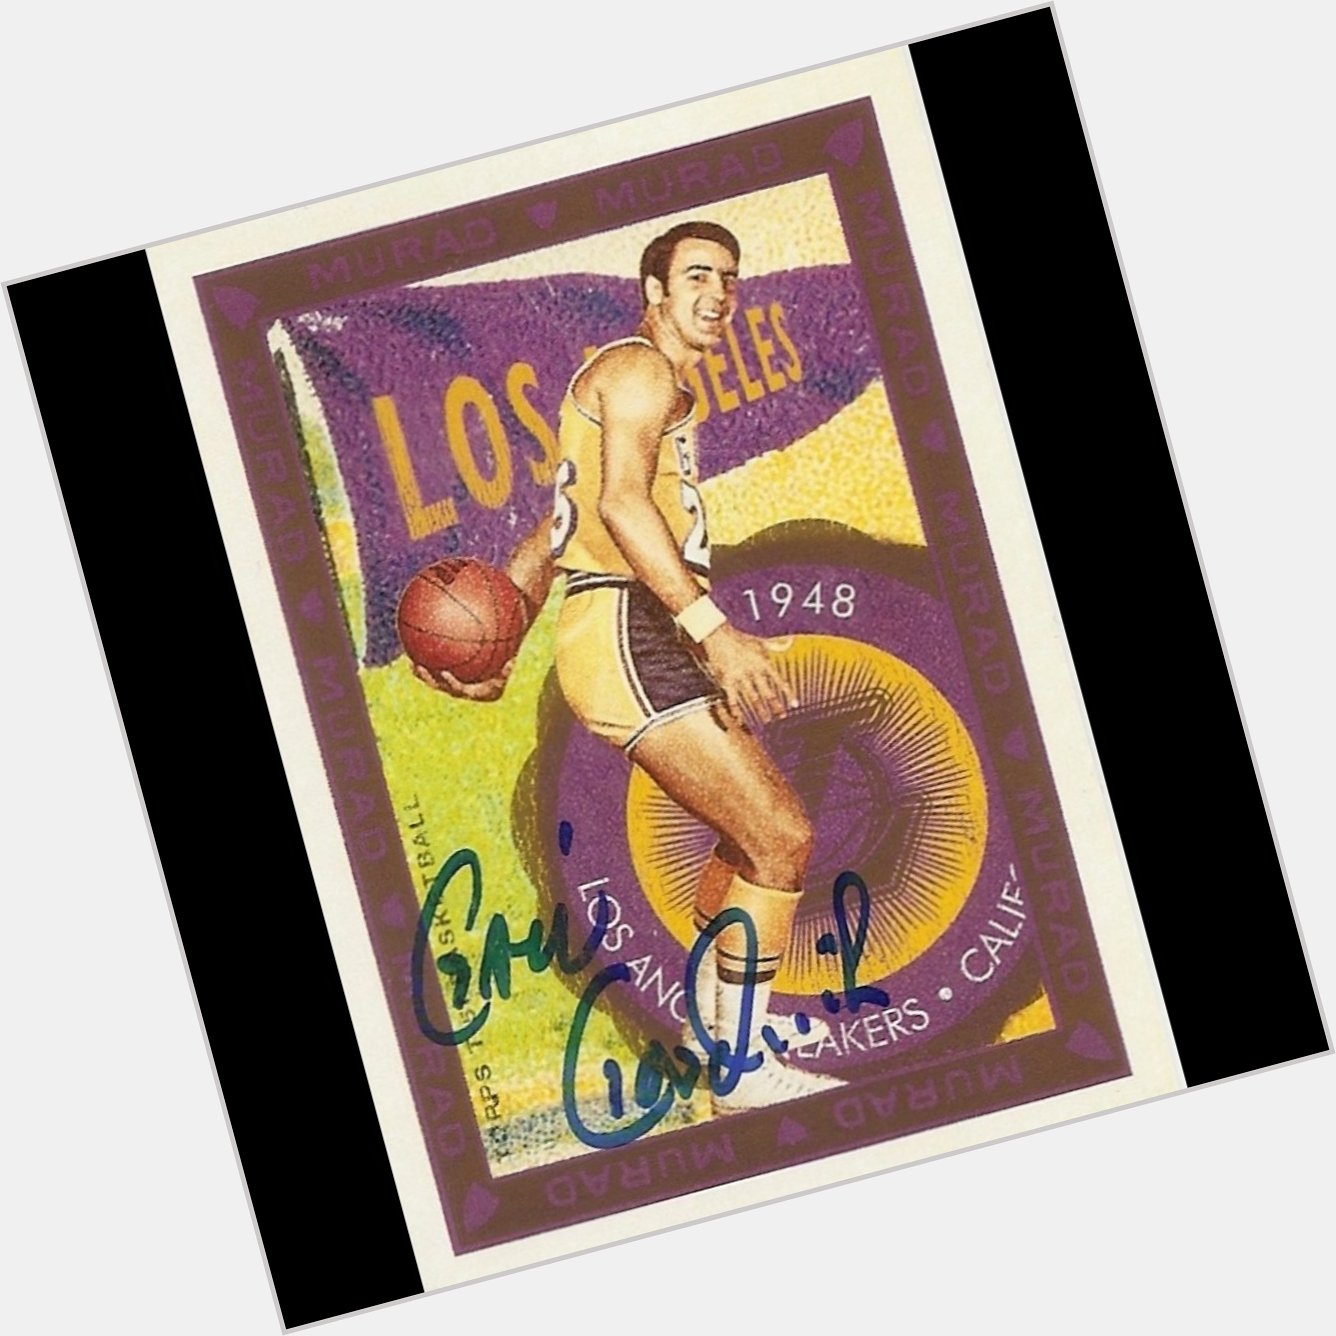 Happy birthday to legend Gail Goodrich who turns 77 today. Enjoy your day! 